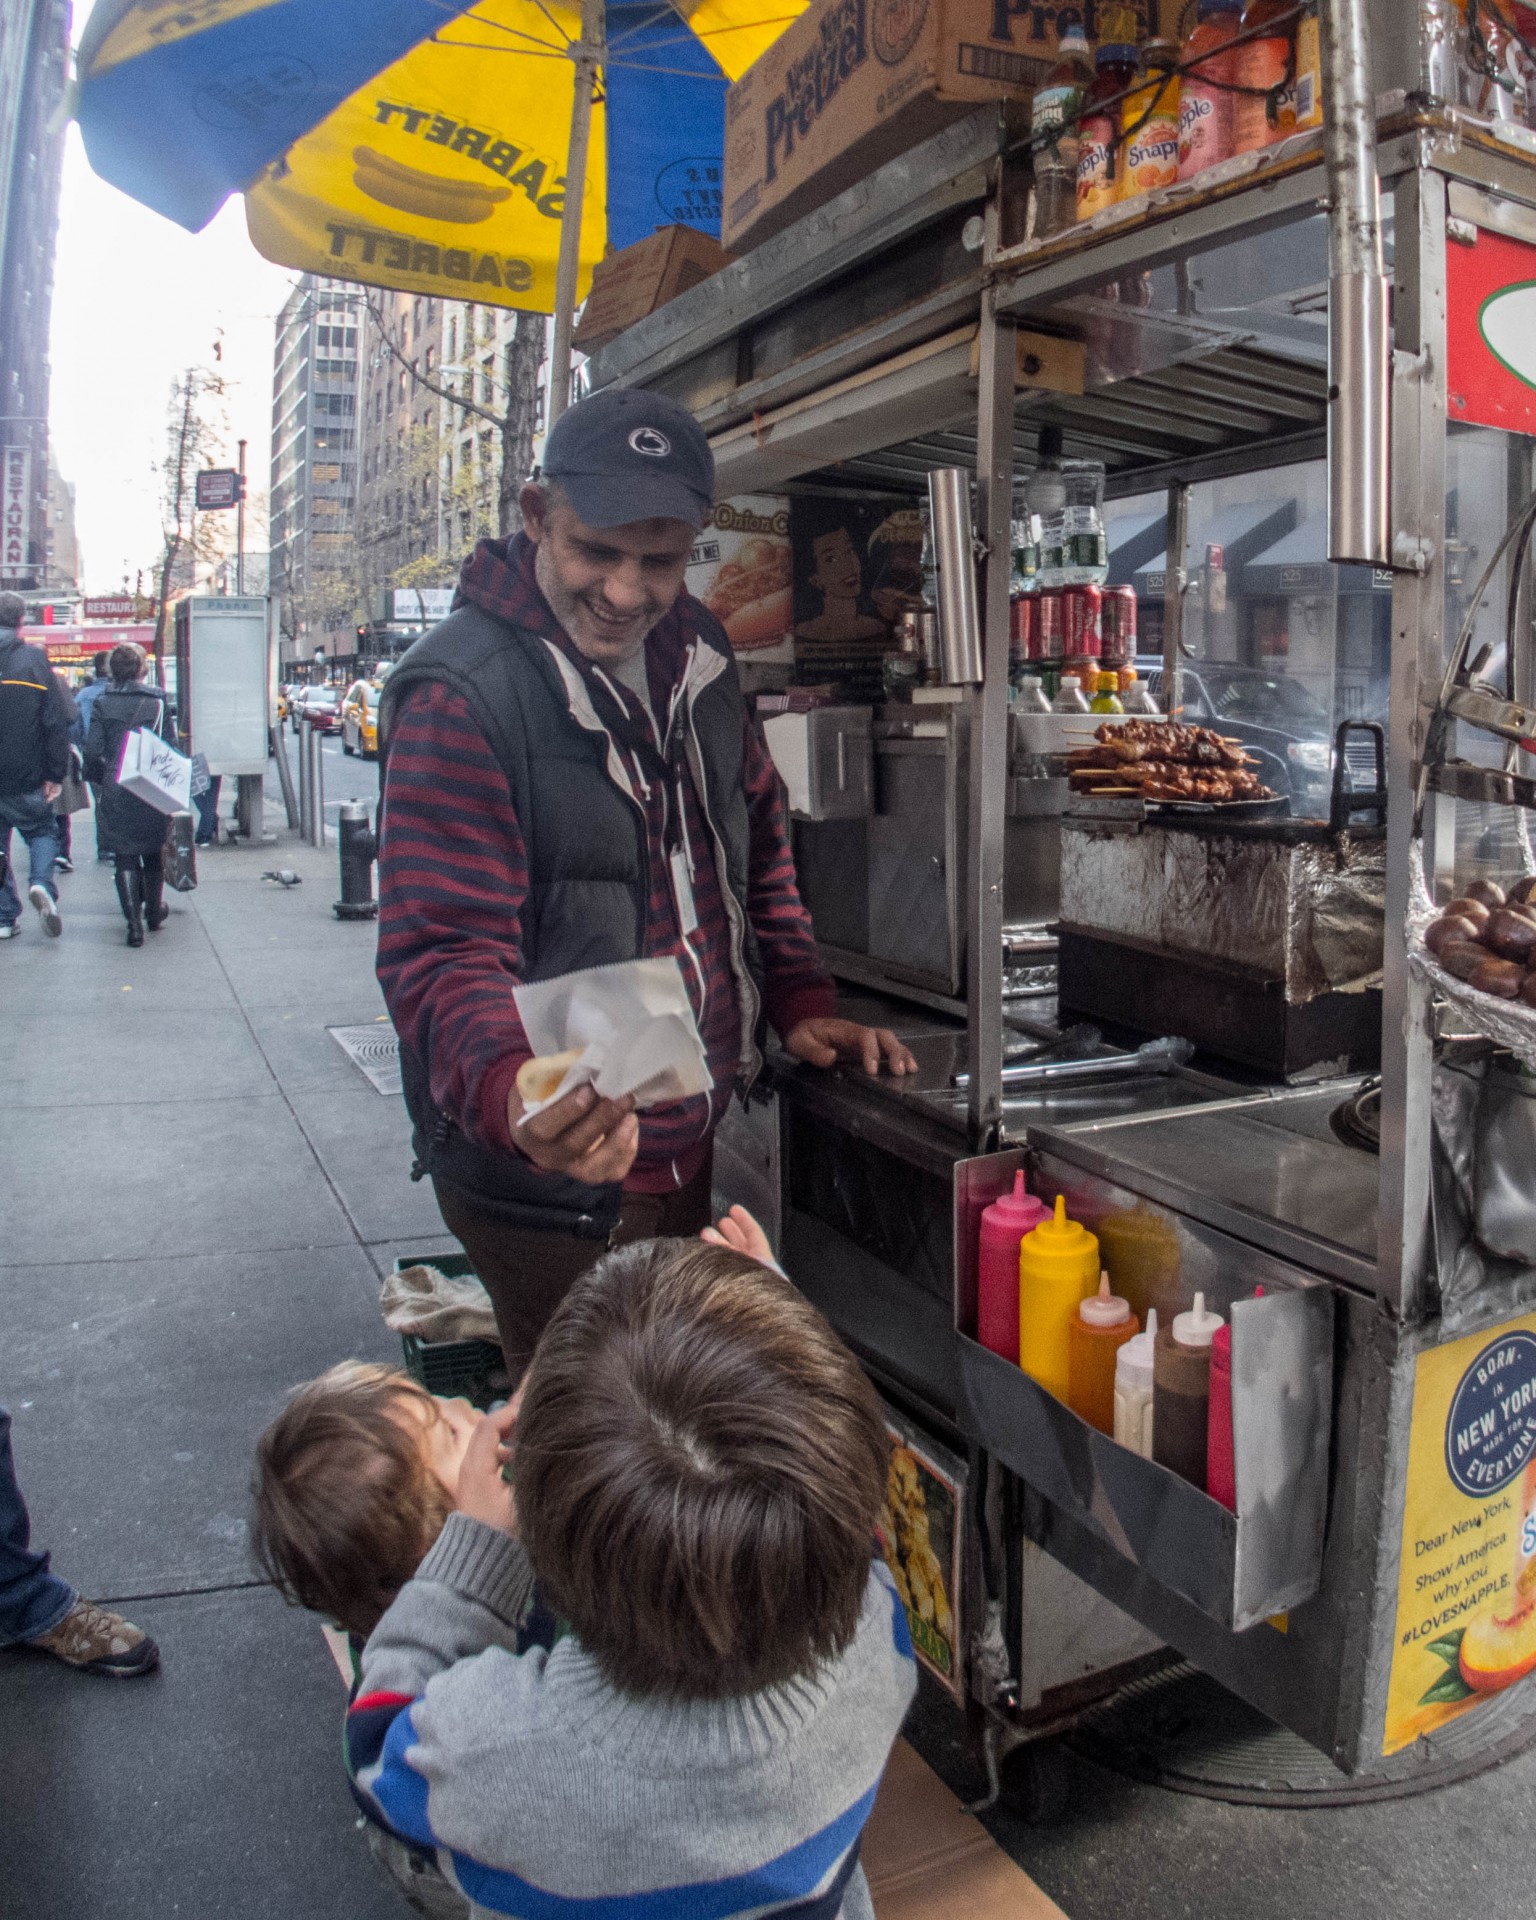 A smiling hot dog vendor hands the boys a warm pretzel on the streets of New York